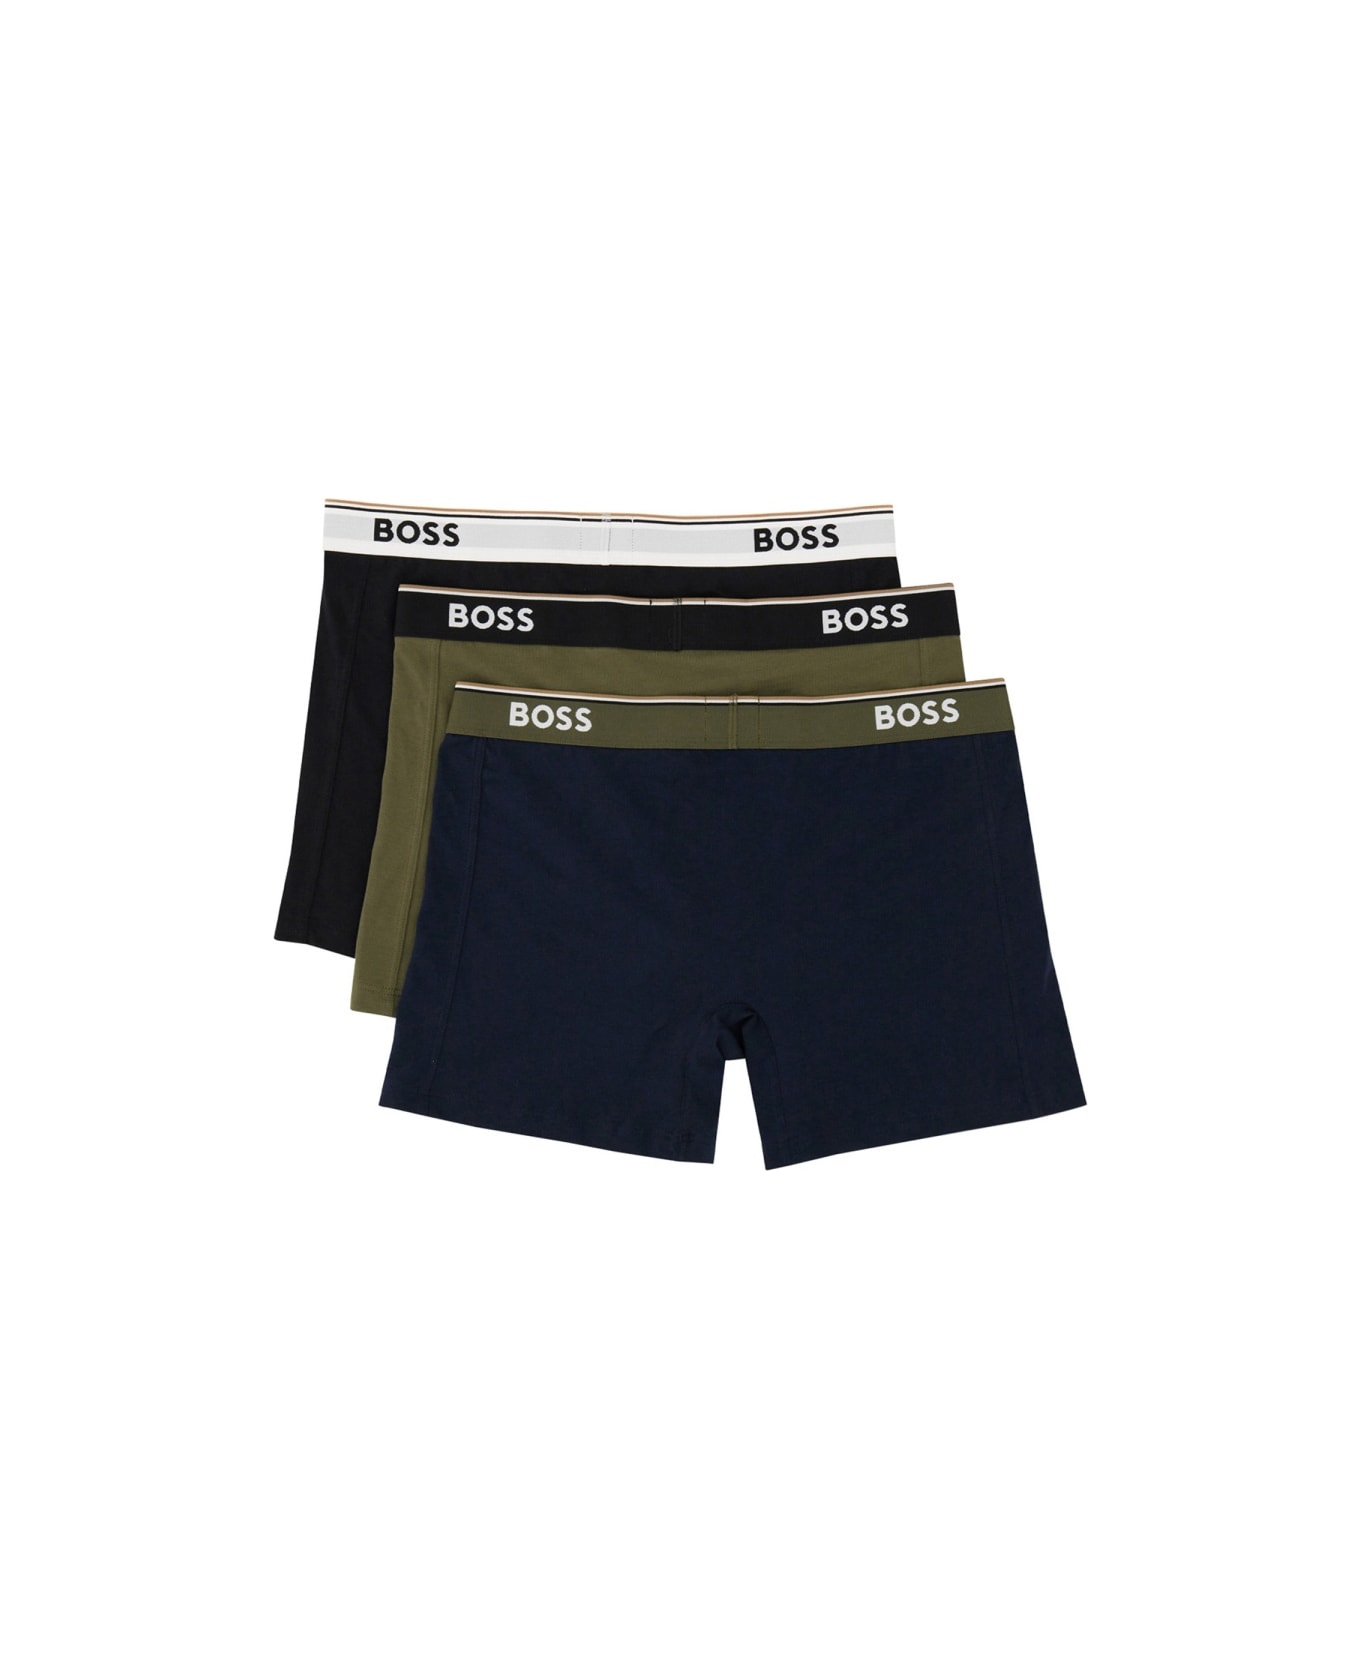 Hugo Boss Pack Of Three Cotton Boxer Shorts With Logo - MULTICOLOUR